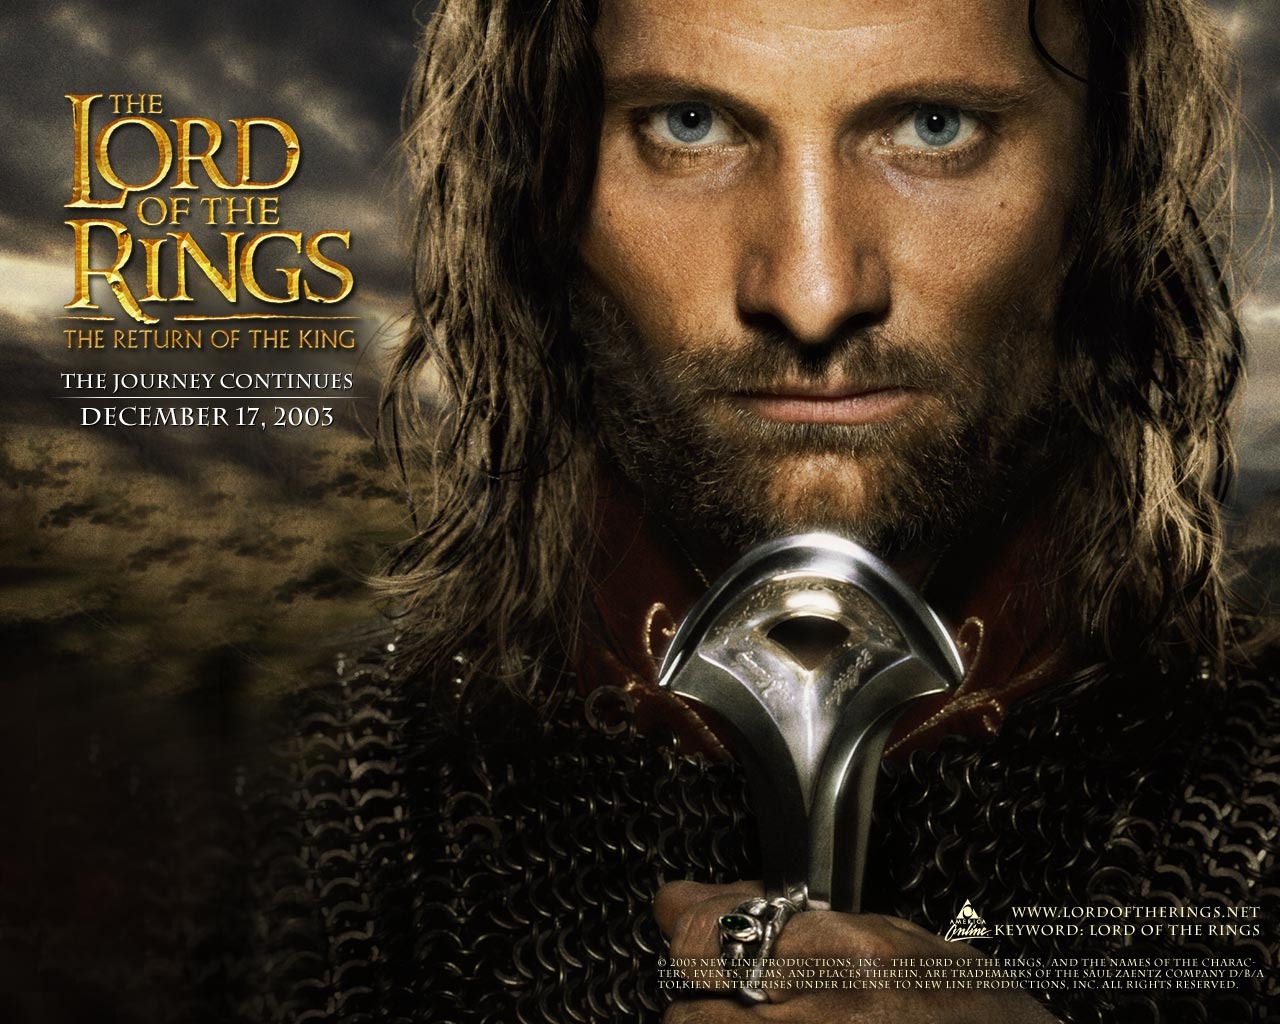 The Lord of the Rings wallpaper #14 - 1280x1024